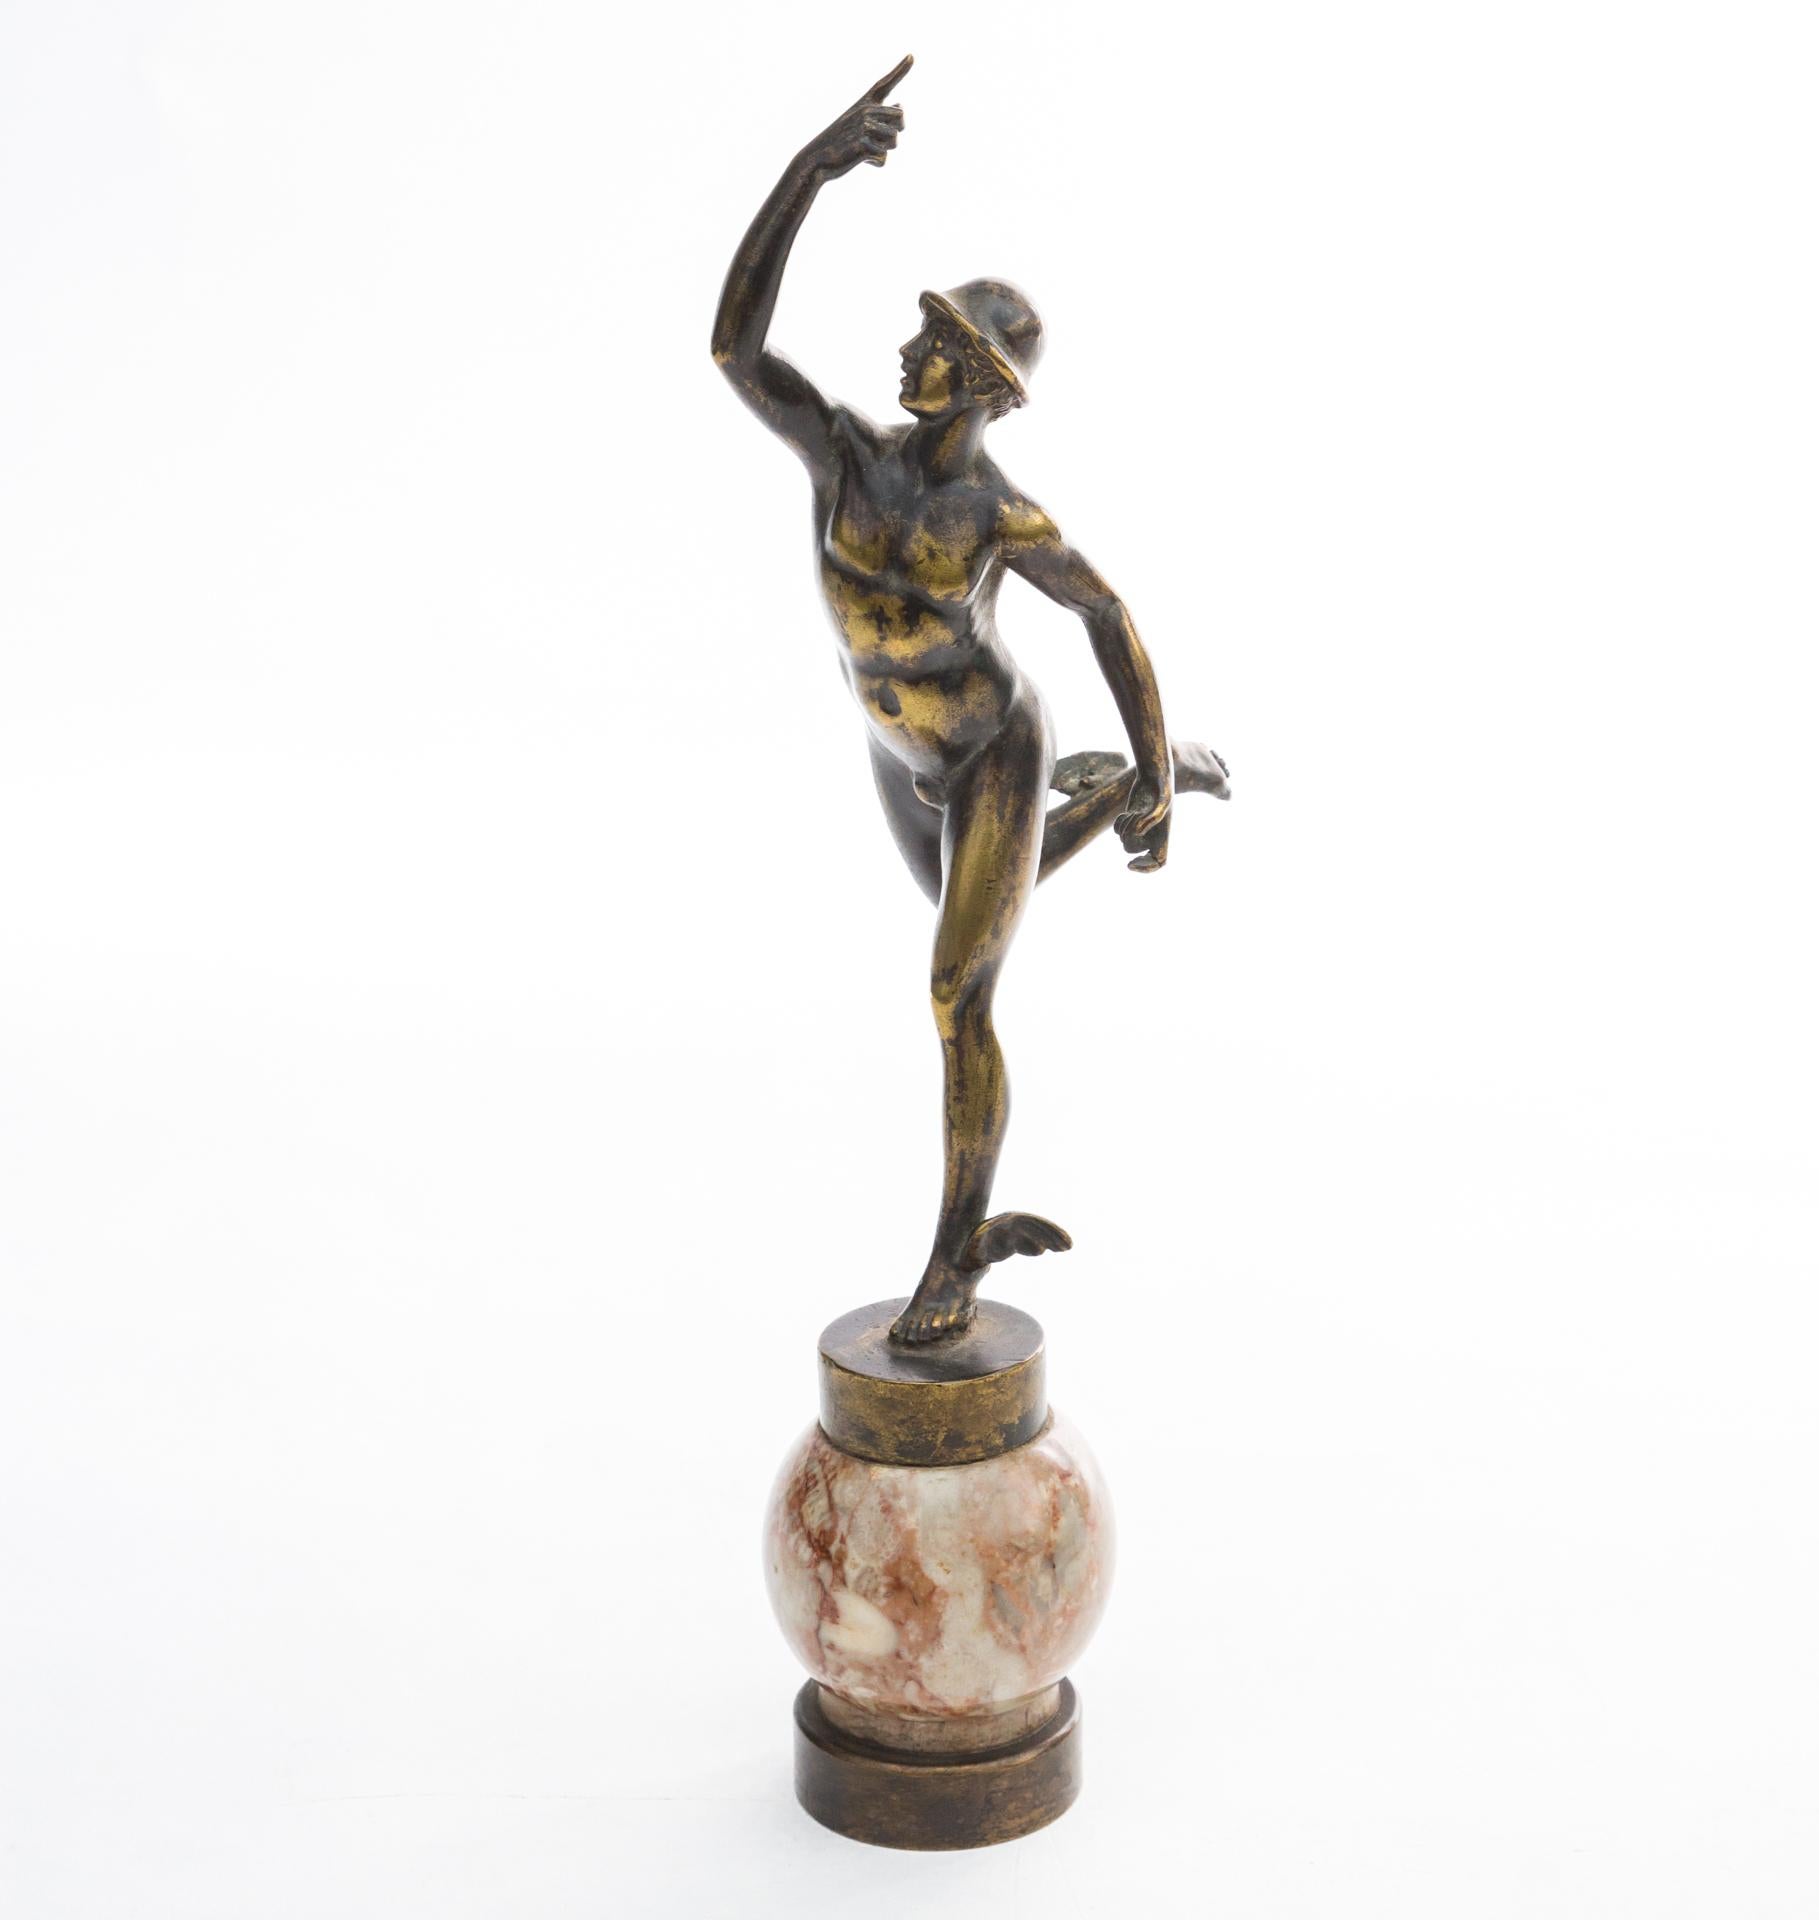 Wonderful Hermes sculpture made of patinated bronze. It depicts a god floating only in a breath of wind. Made in the style of Art Deco in the interwar period.

The beautiful sculpture is designed to be viewed from all sides. In an extremely bold